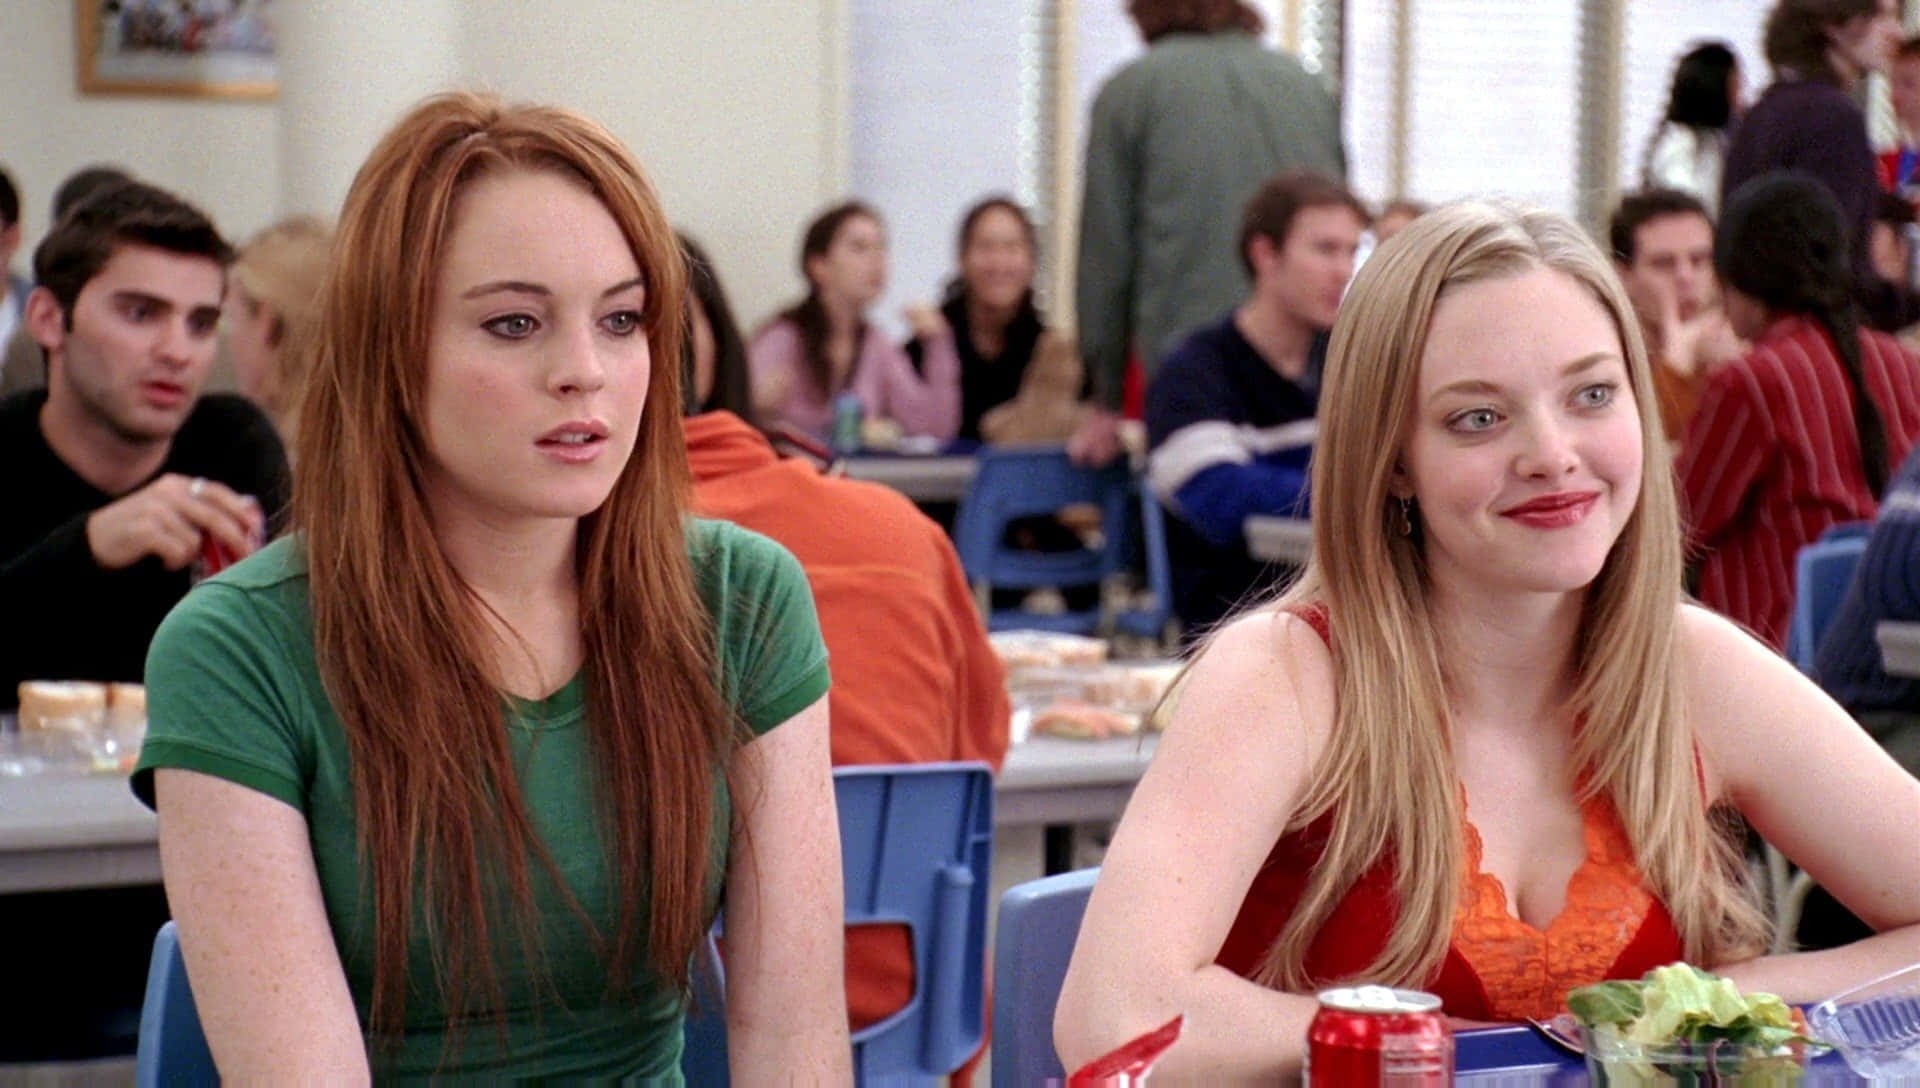 Cady And Karen From Mean Girls